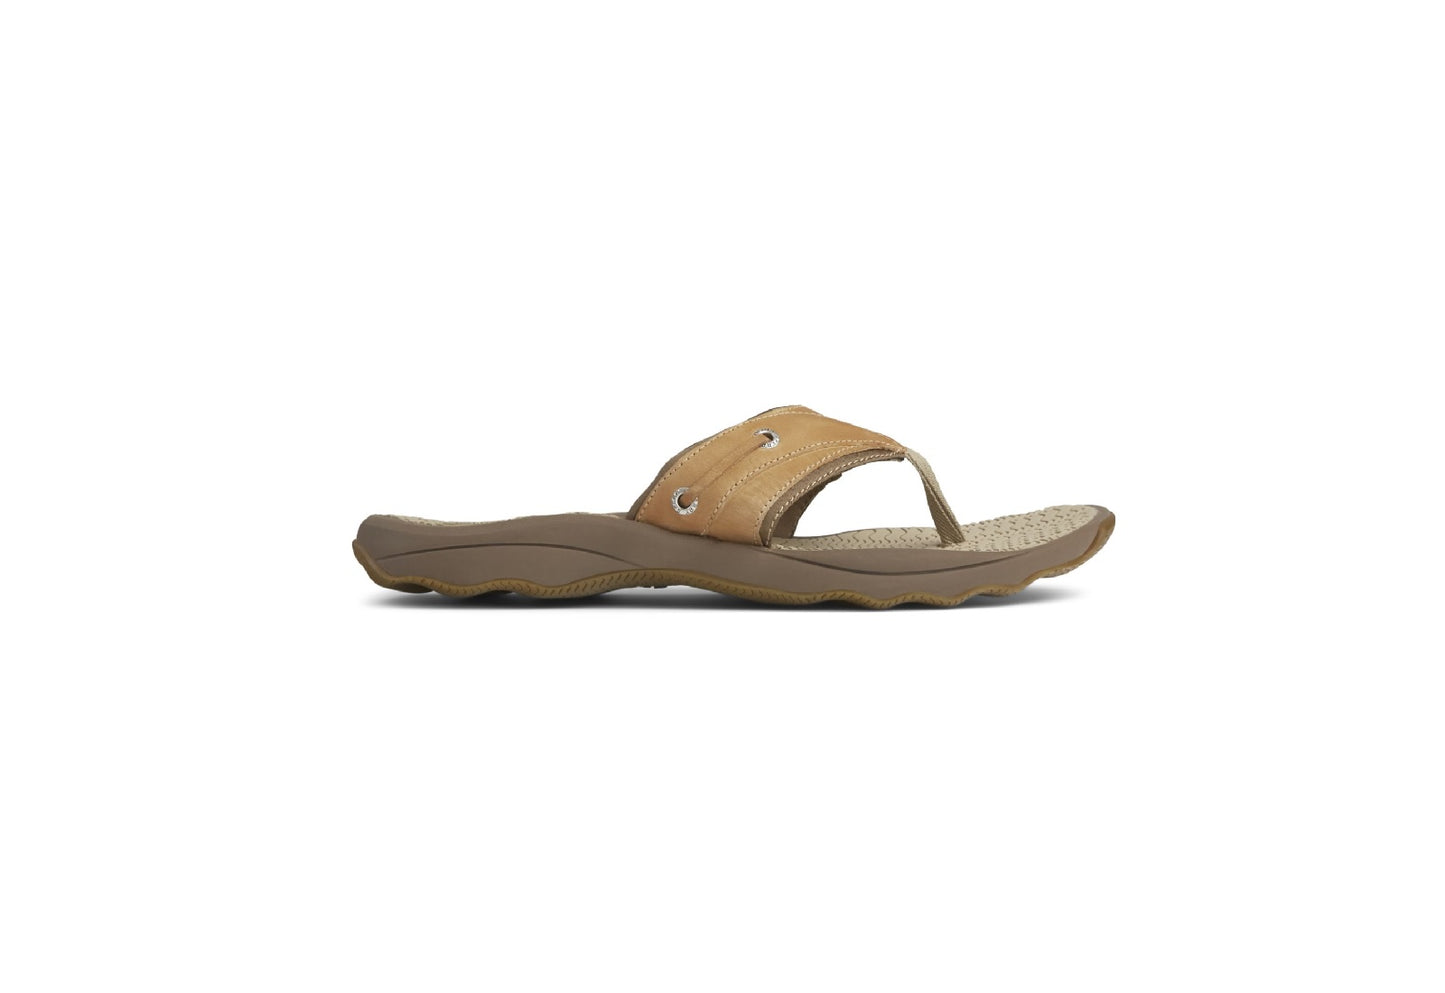 Sperry Men's Outer Banks Thong Sandals, Tan